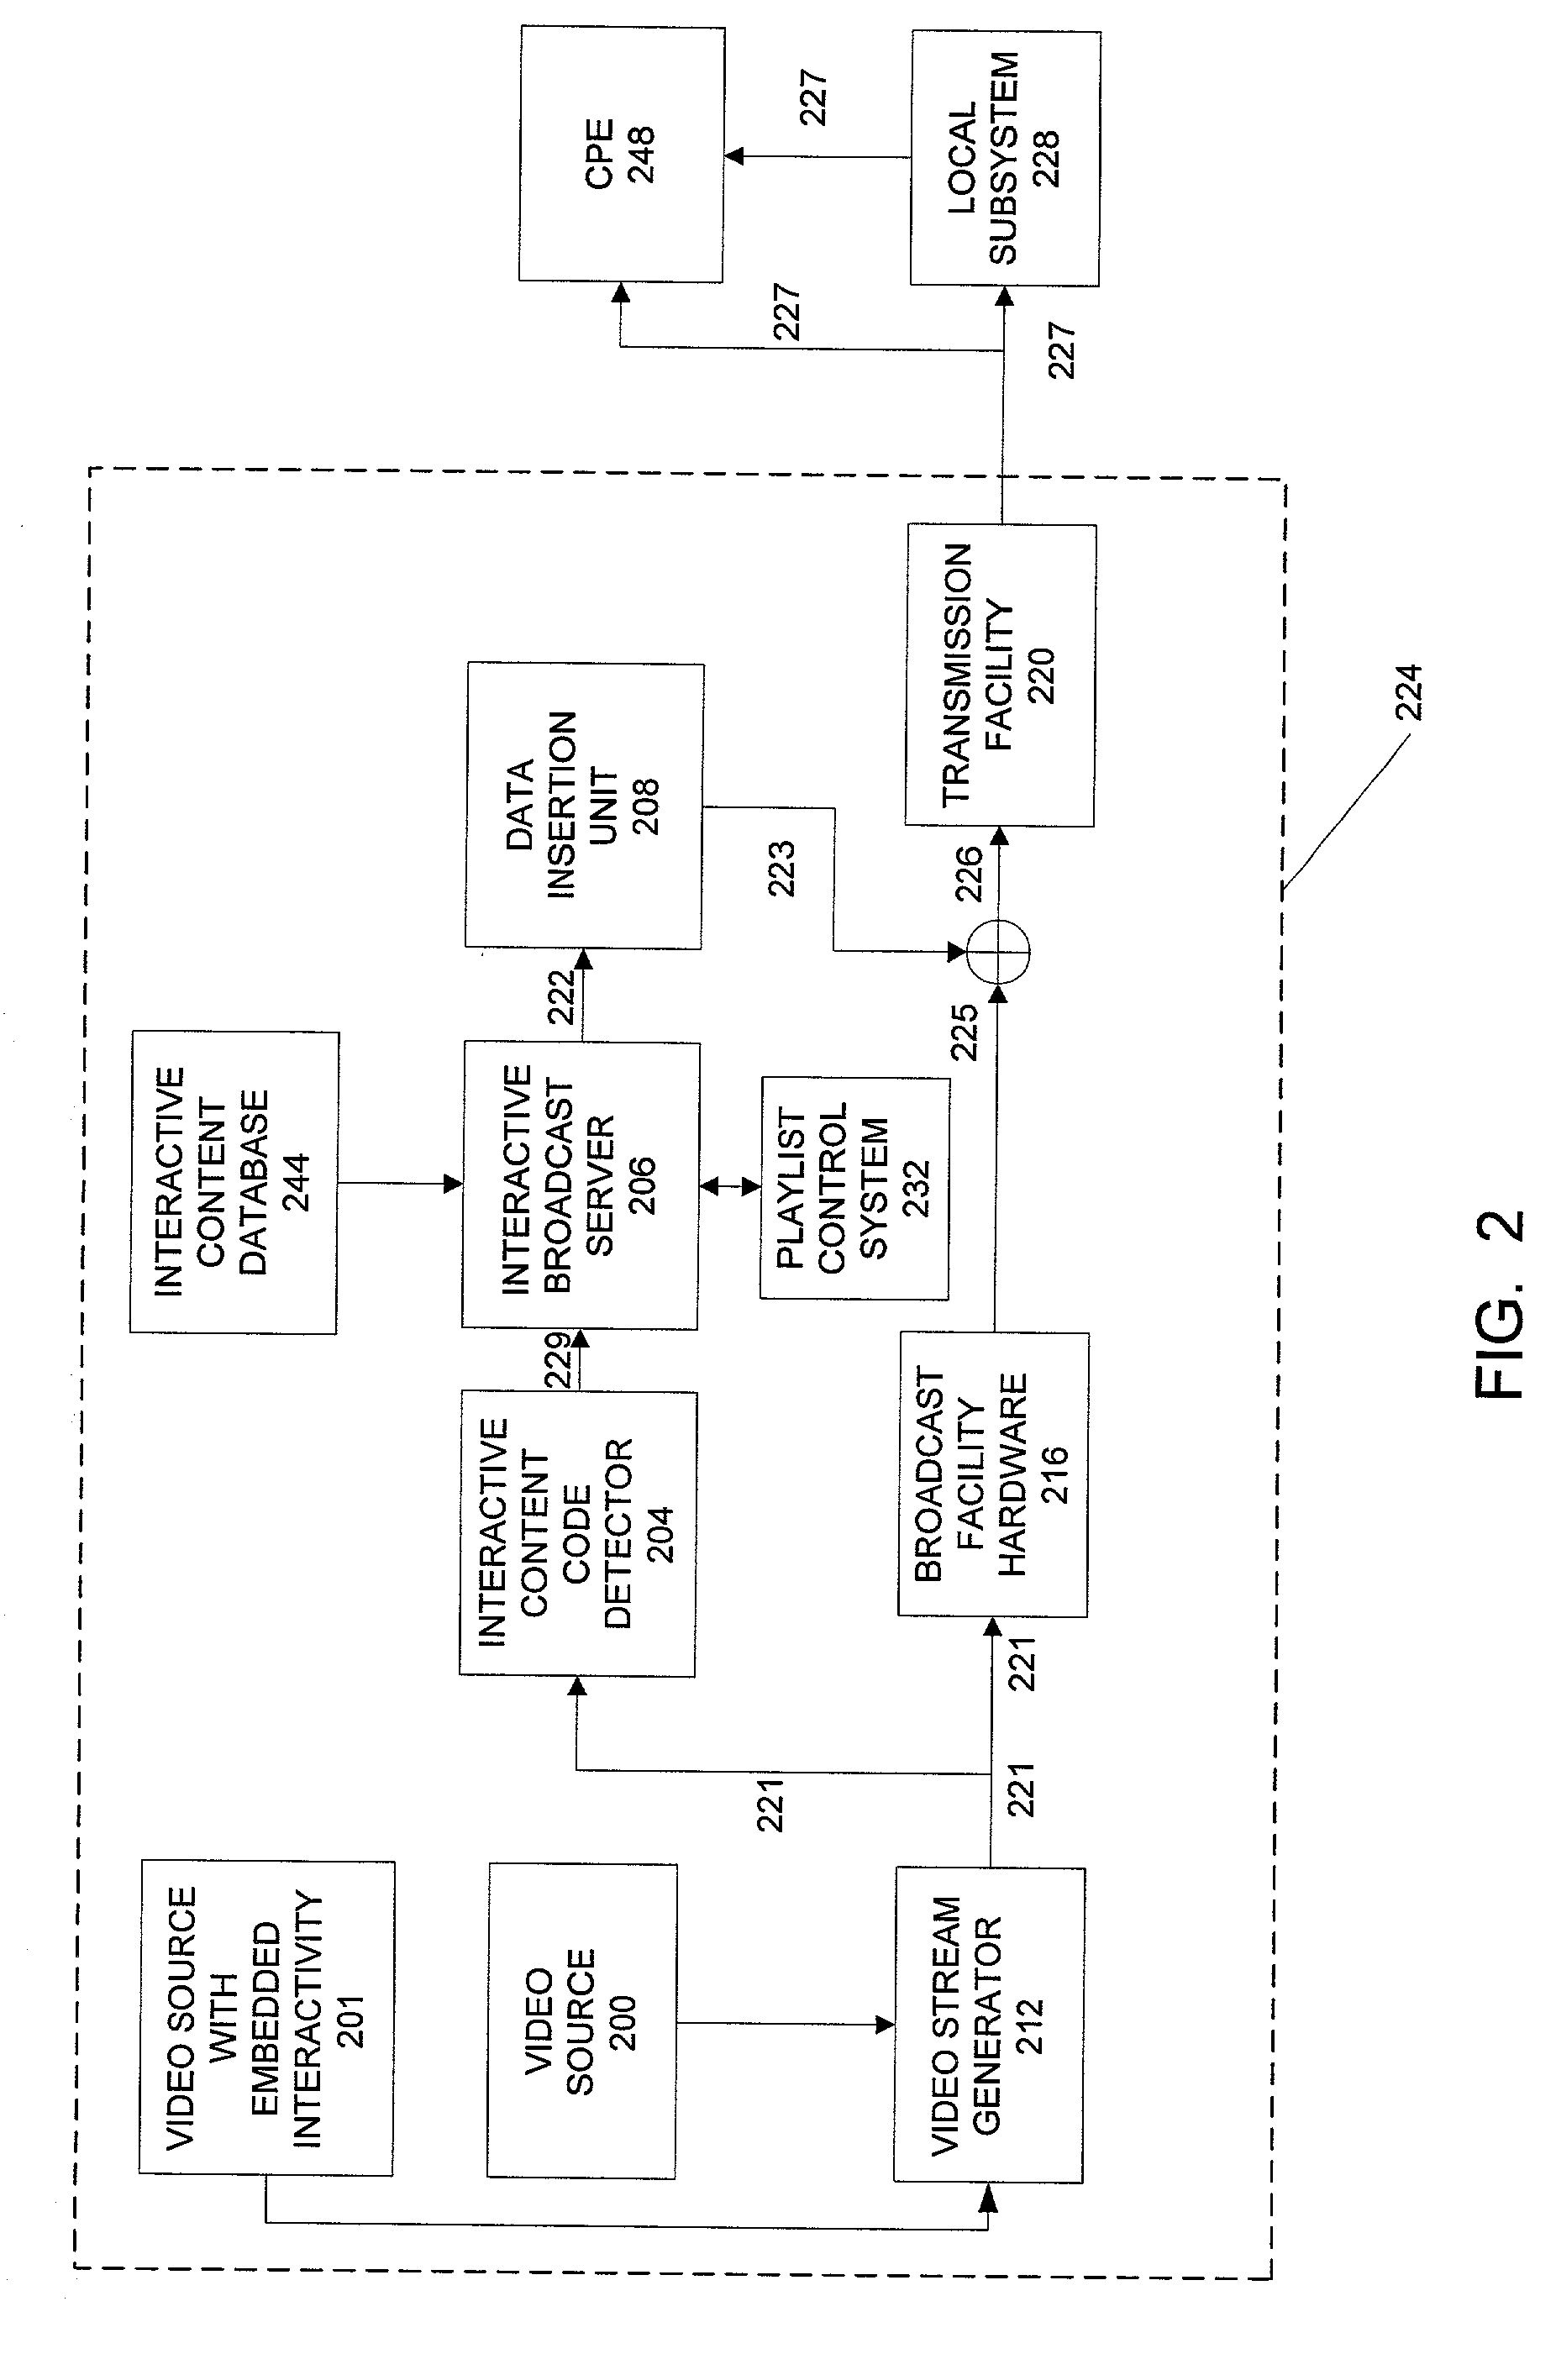 Interactive content delivery methods and apparatus